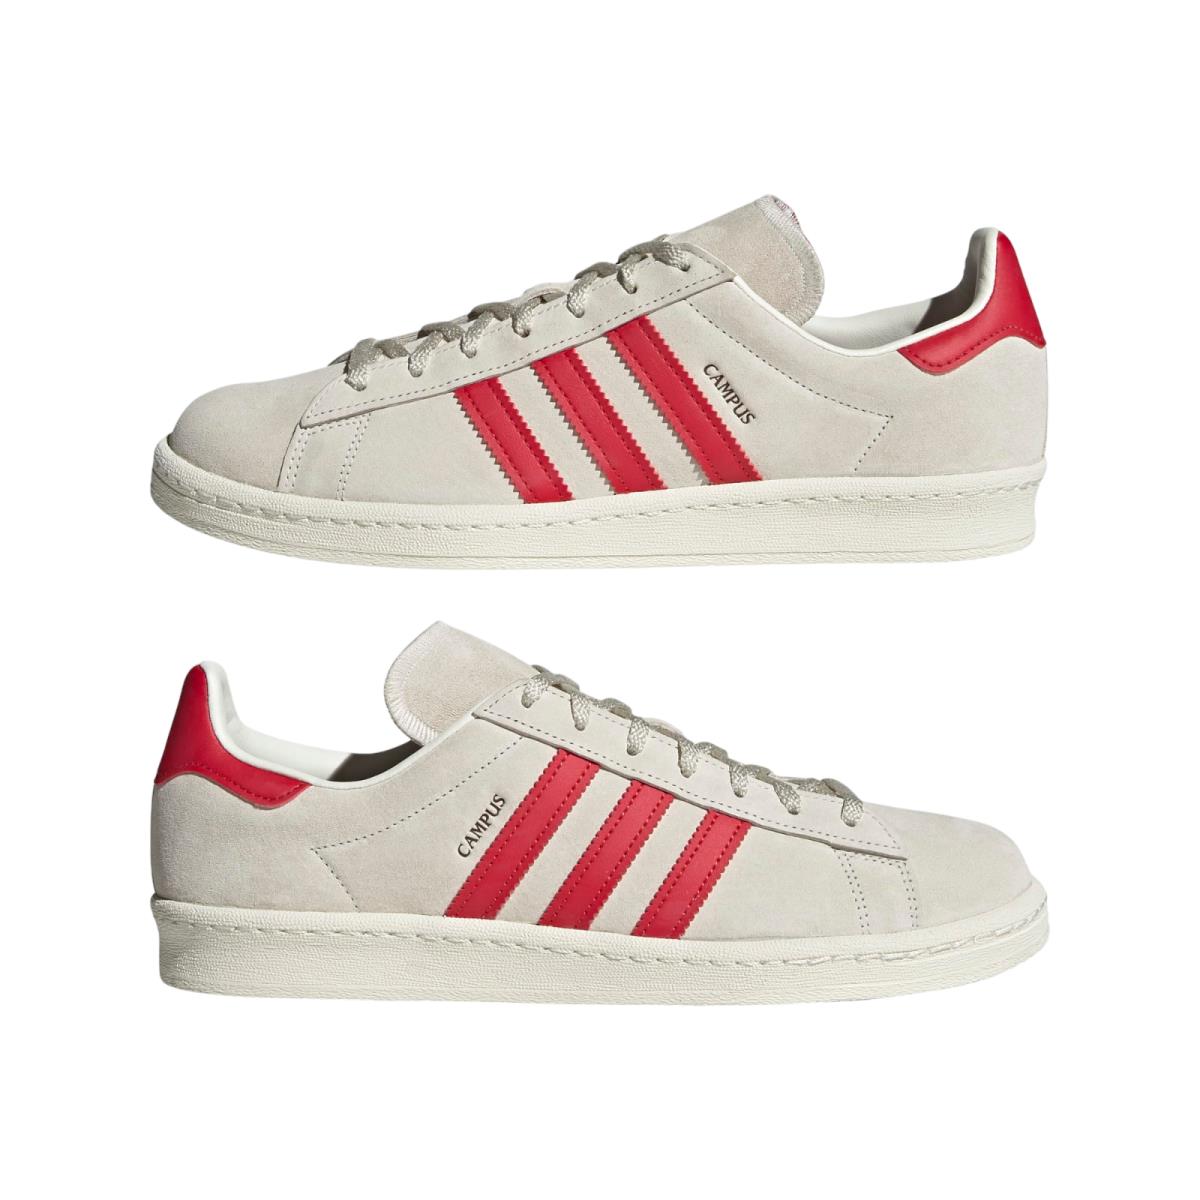 Men`s Adidas Originals Off White Campus 80s Leather Sneakers 12.5 GY4580